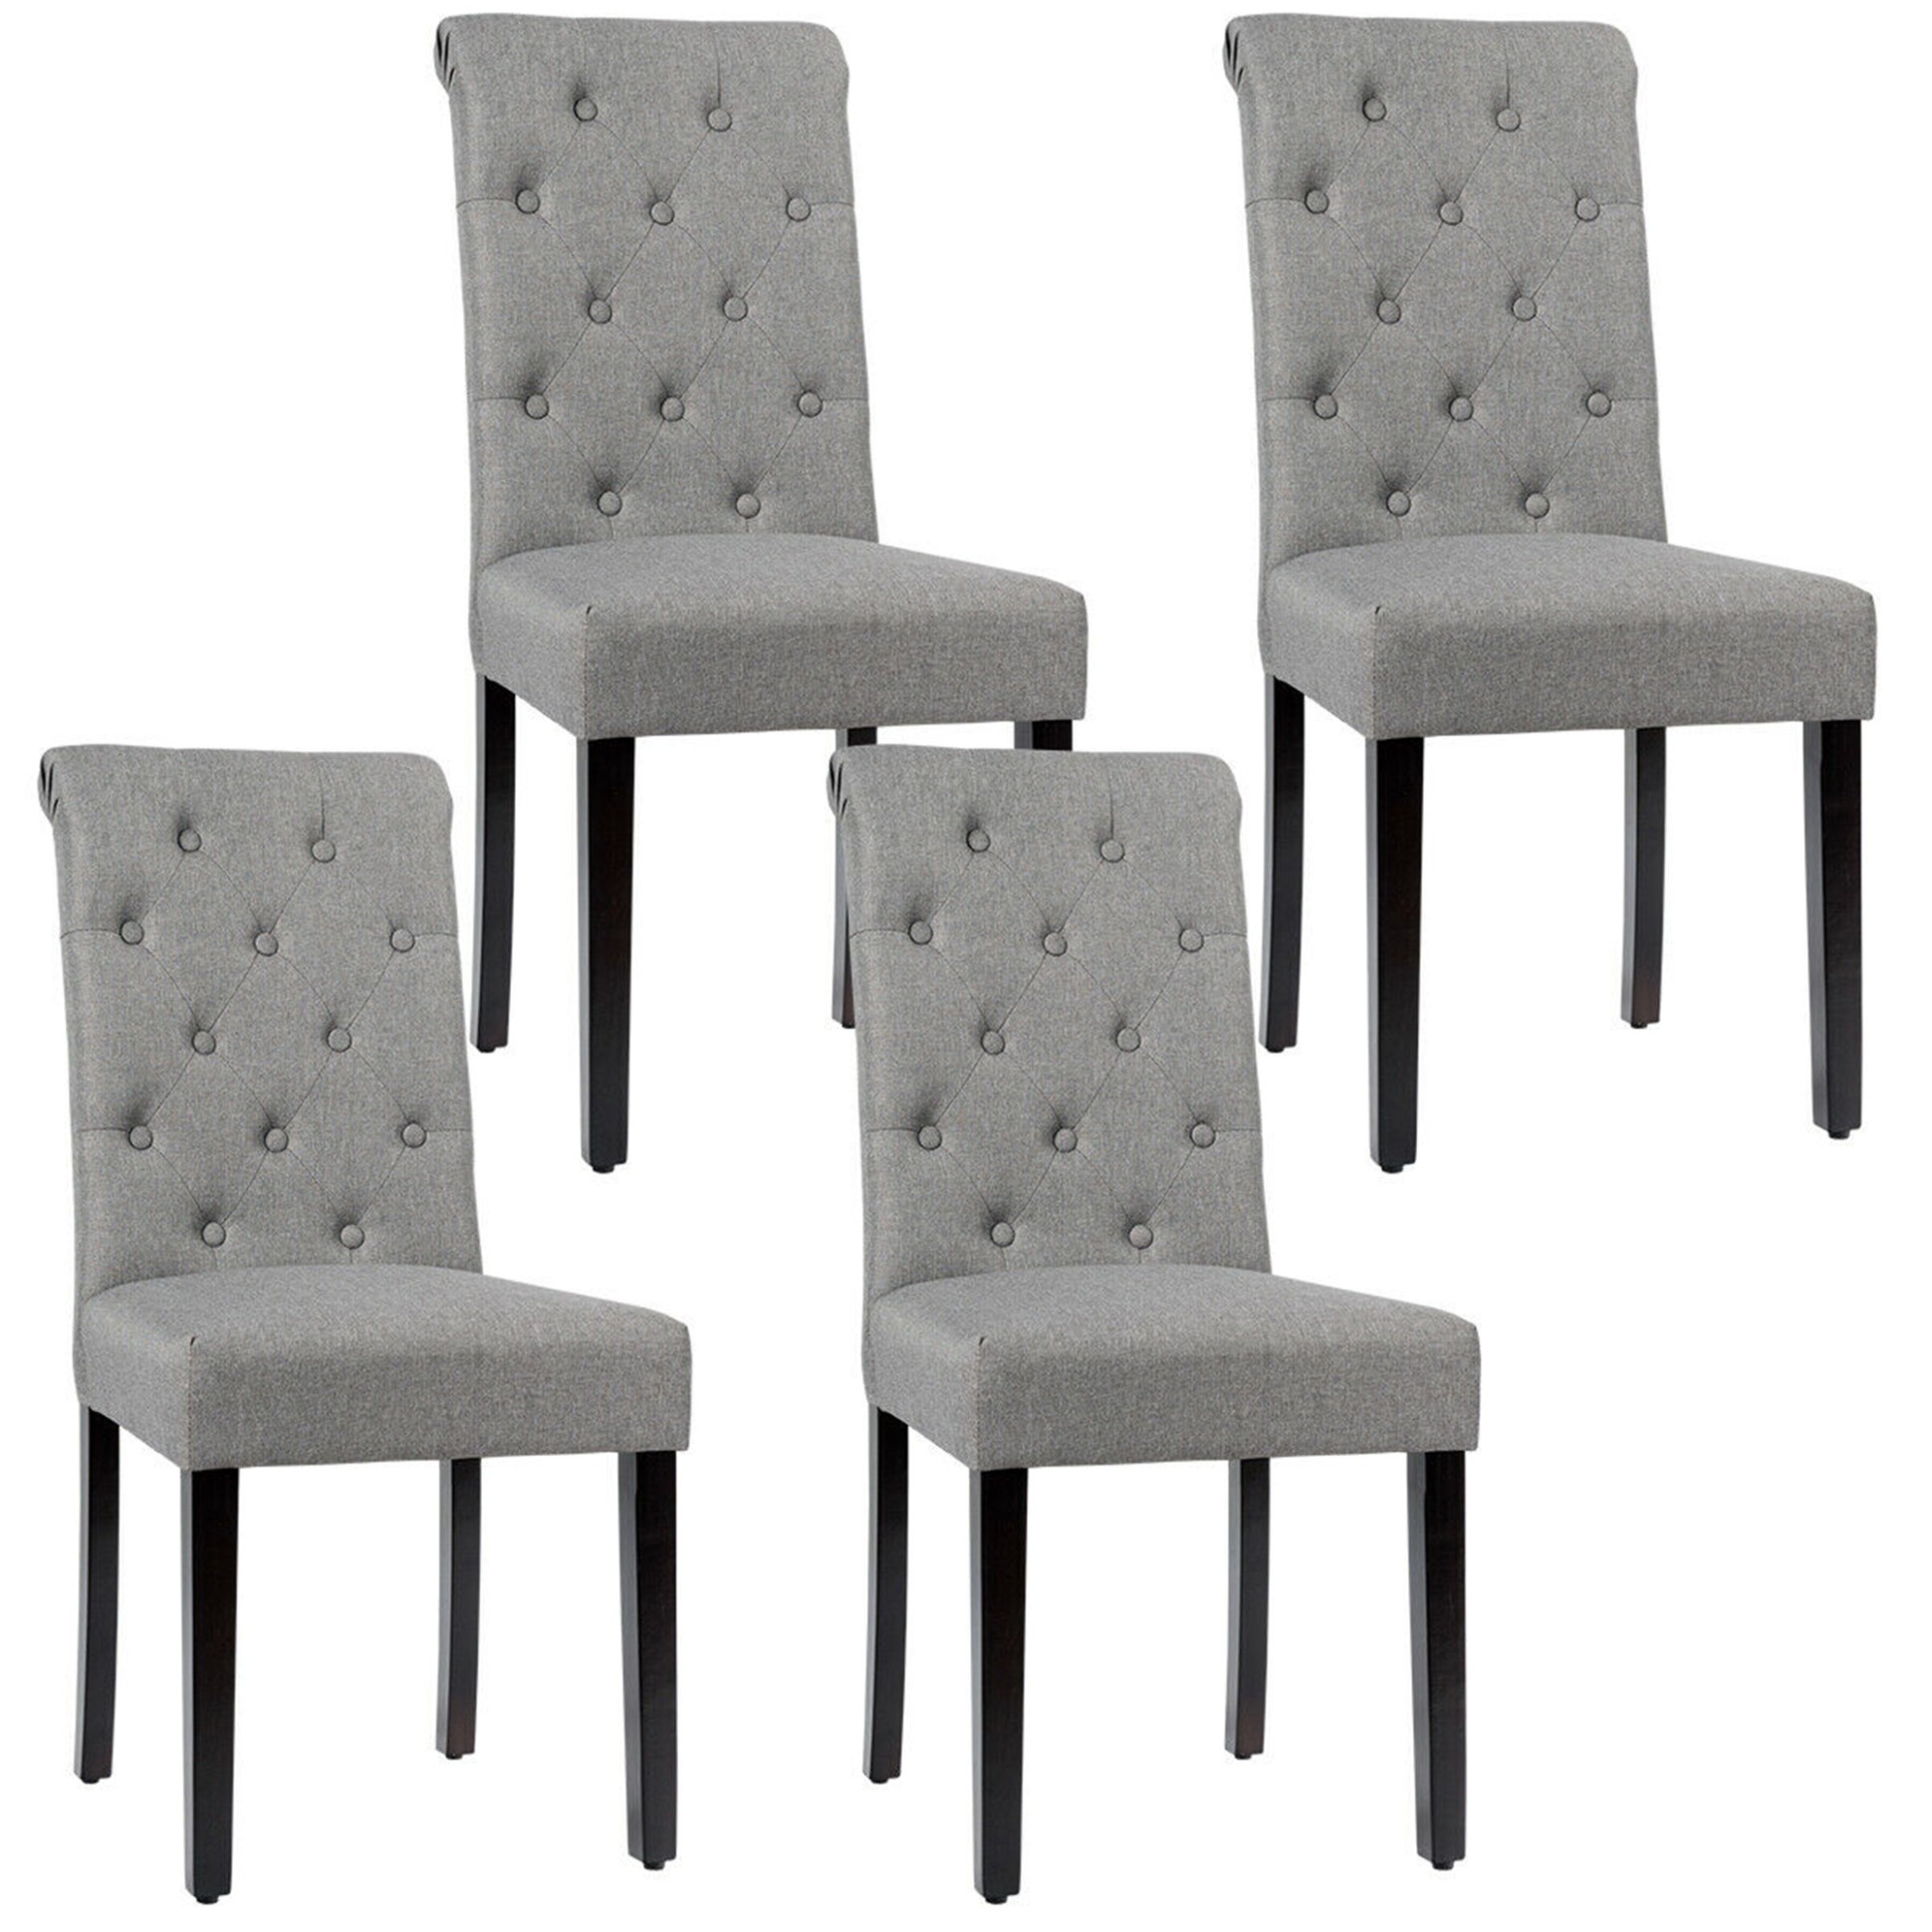 Gymax Dining Chair, Set of 3, Grey - grey kitchen chairs